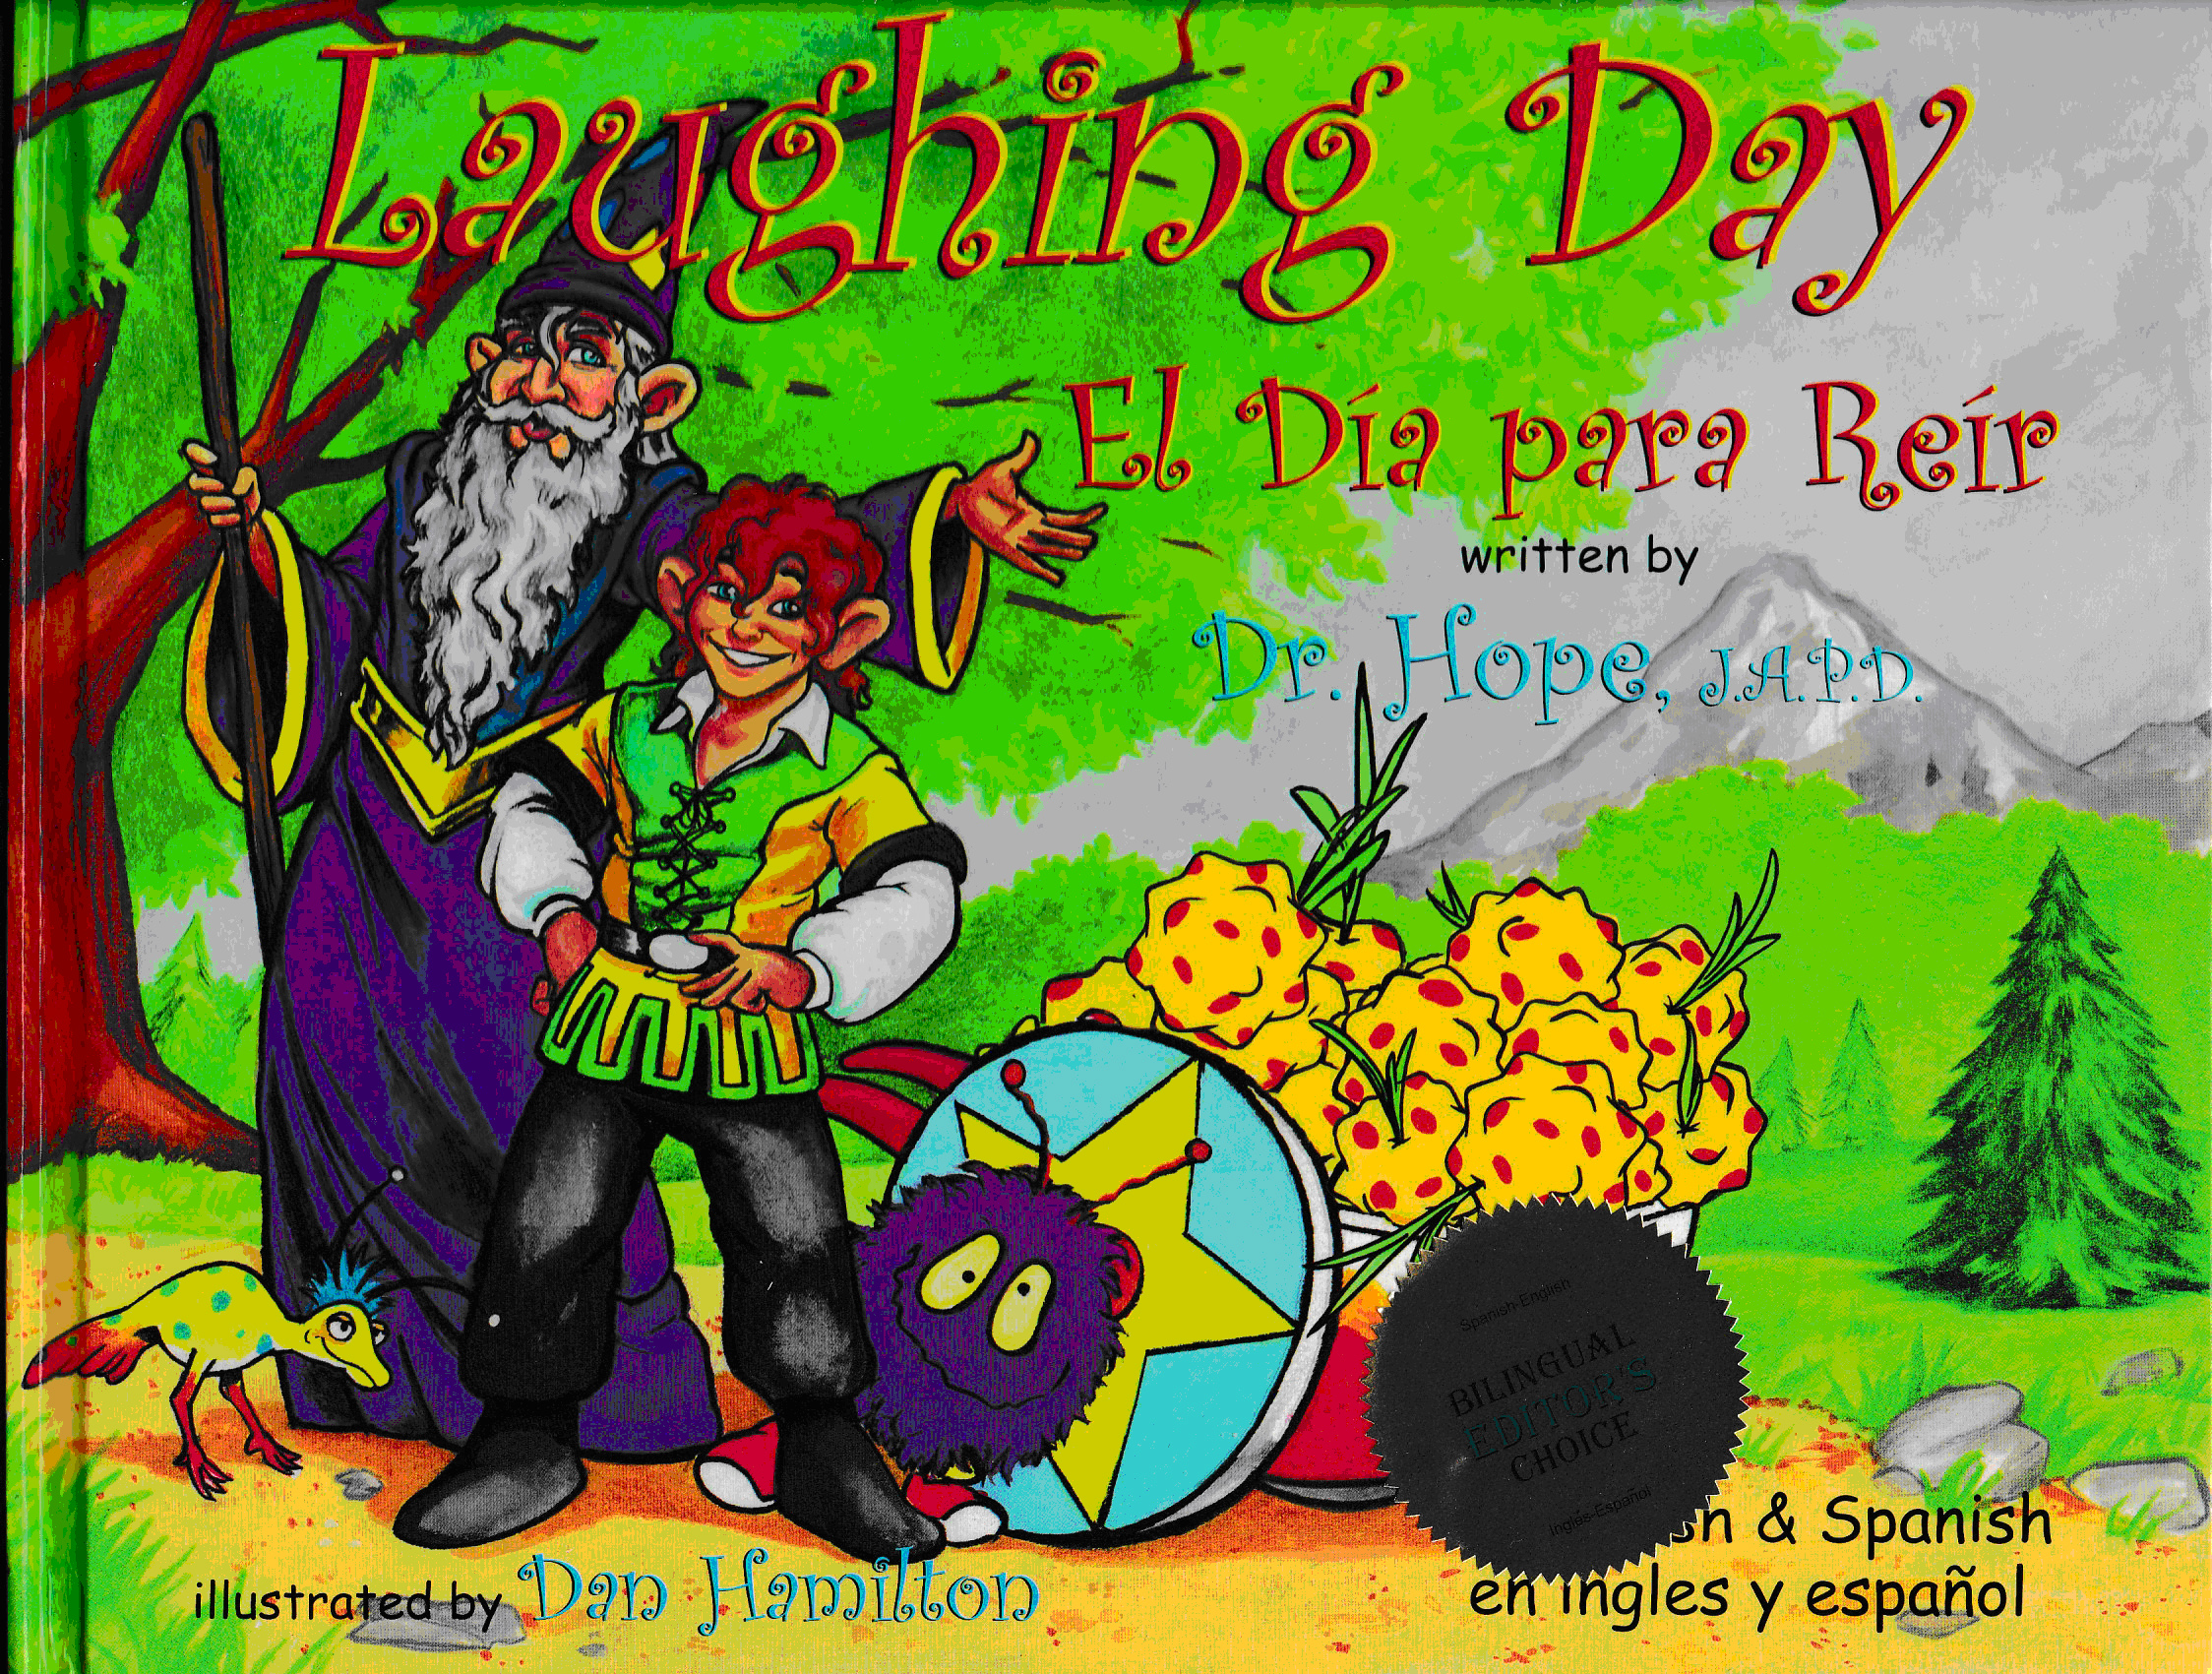 Laughing Day, an award-winning children's picture book by author Dr. Hope.